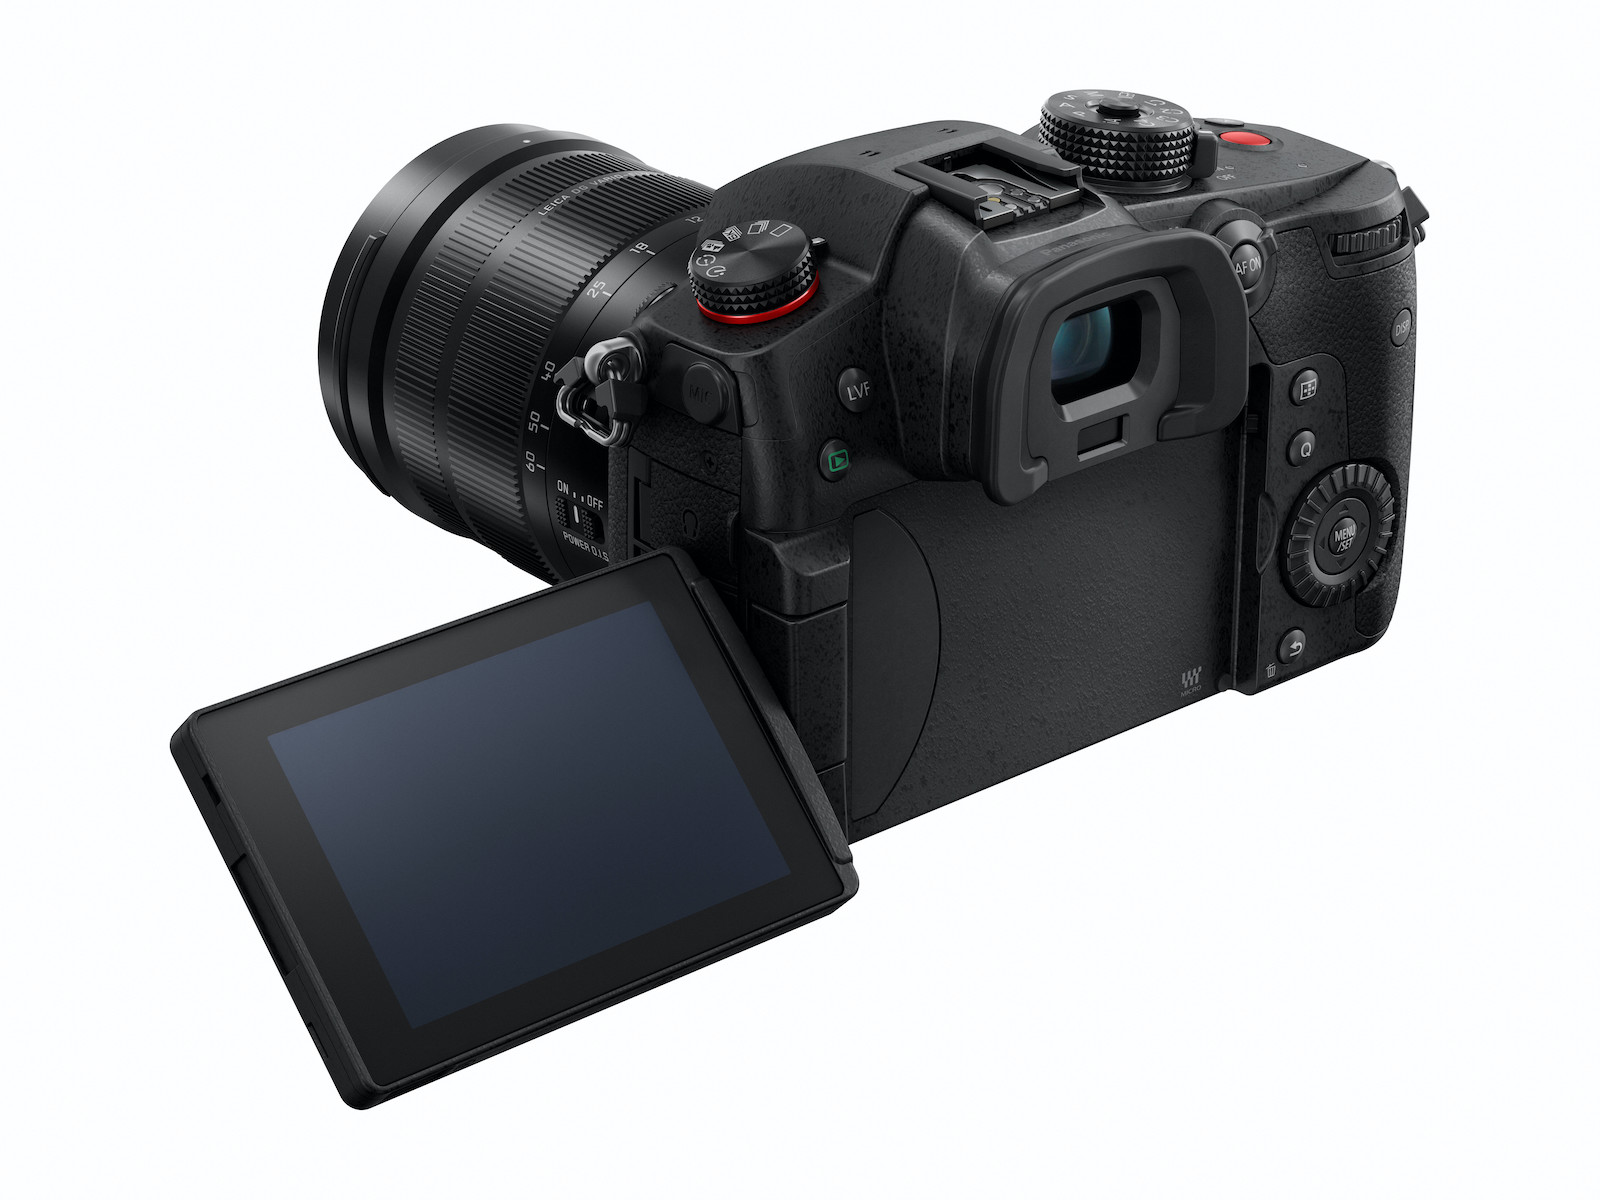 Rear quarter view of the GH5M2 showing the articulating screen. Image: Panasonic.